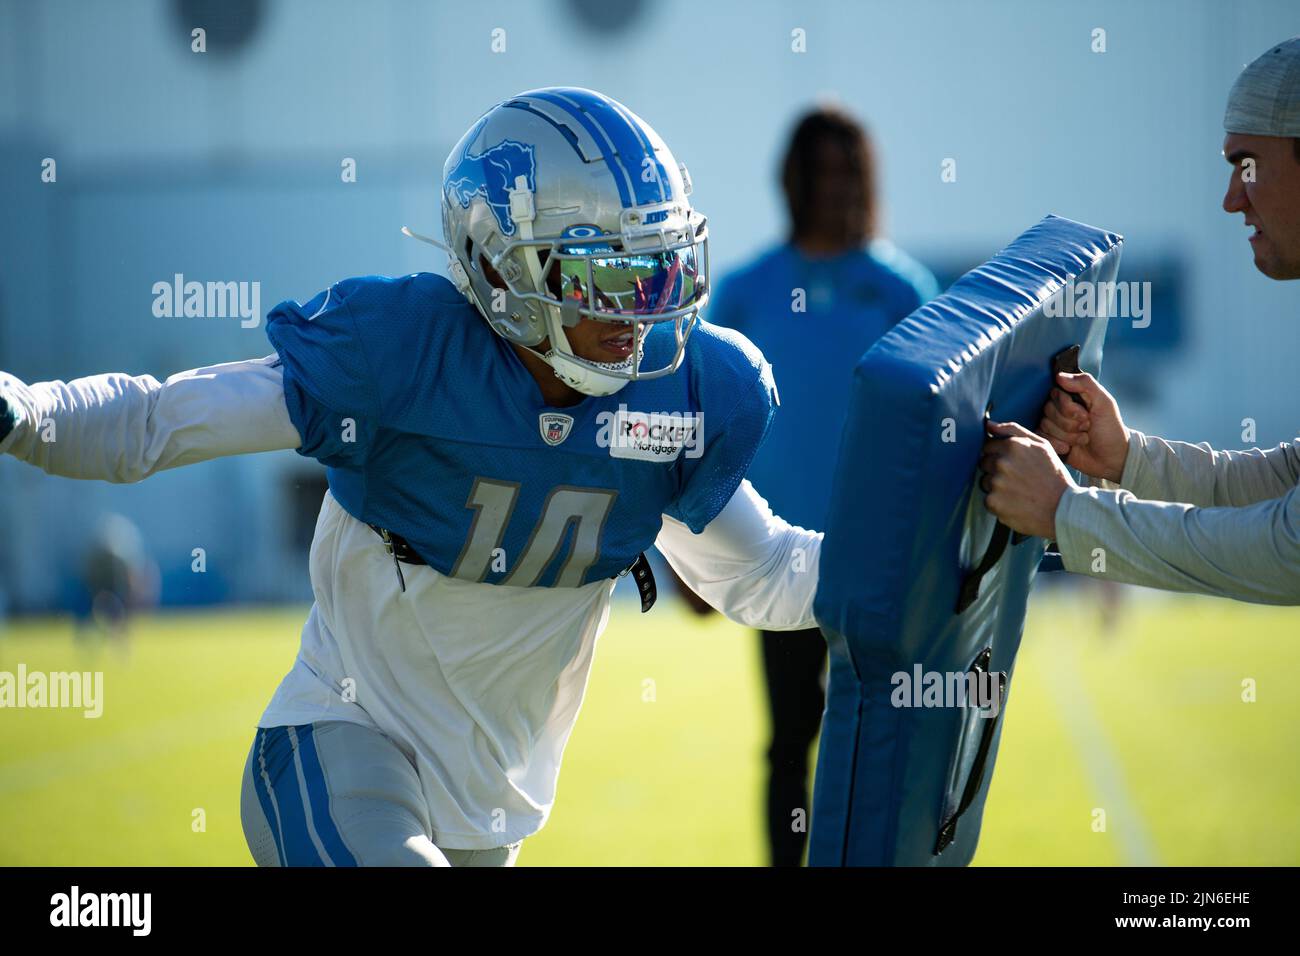 ALLEN PARK, MI - AUGUST 09: Detroit Lions WR Amon-Ra St. Brown (14) during Lions training camp on August 9, 2022 at Detroiit Lions Training Facility in Allen Park, MI (Photo by Allan Dranberg/CSM) Credit: Cal Sport Media/Alamy Live News Stock Photo